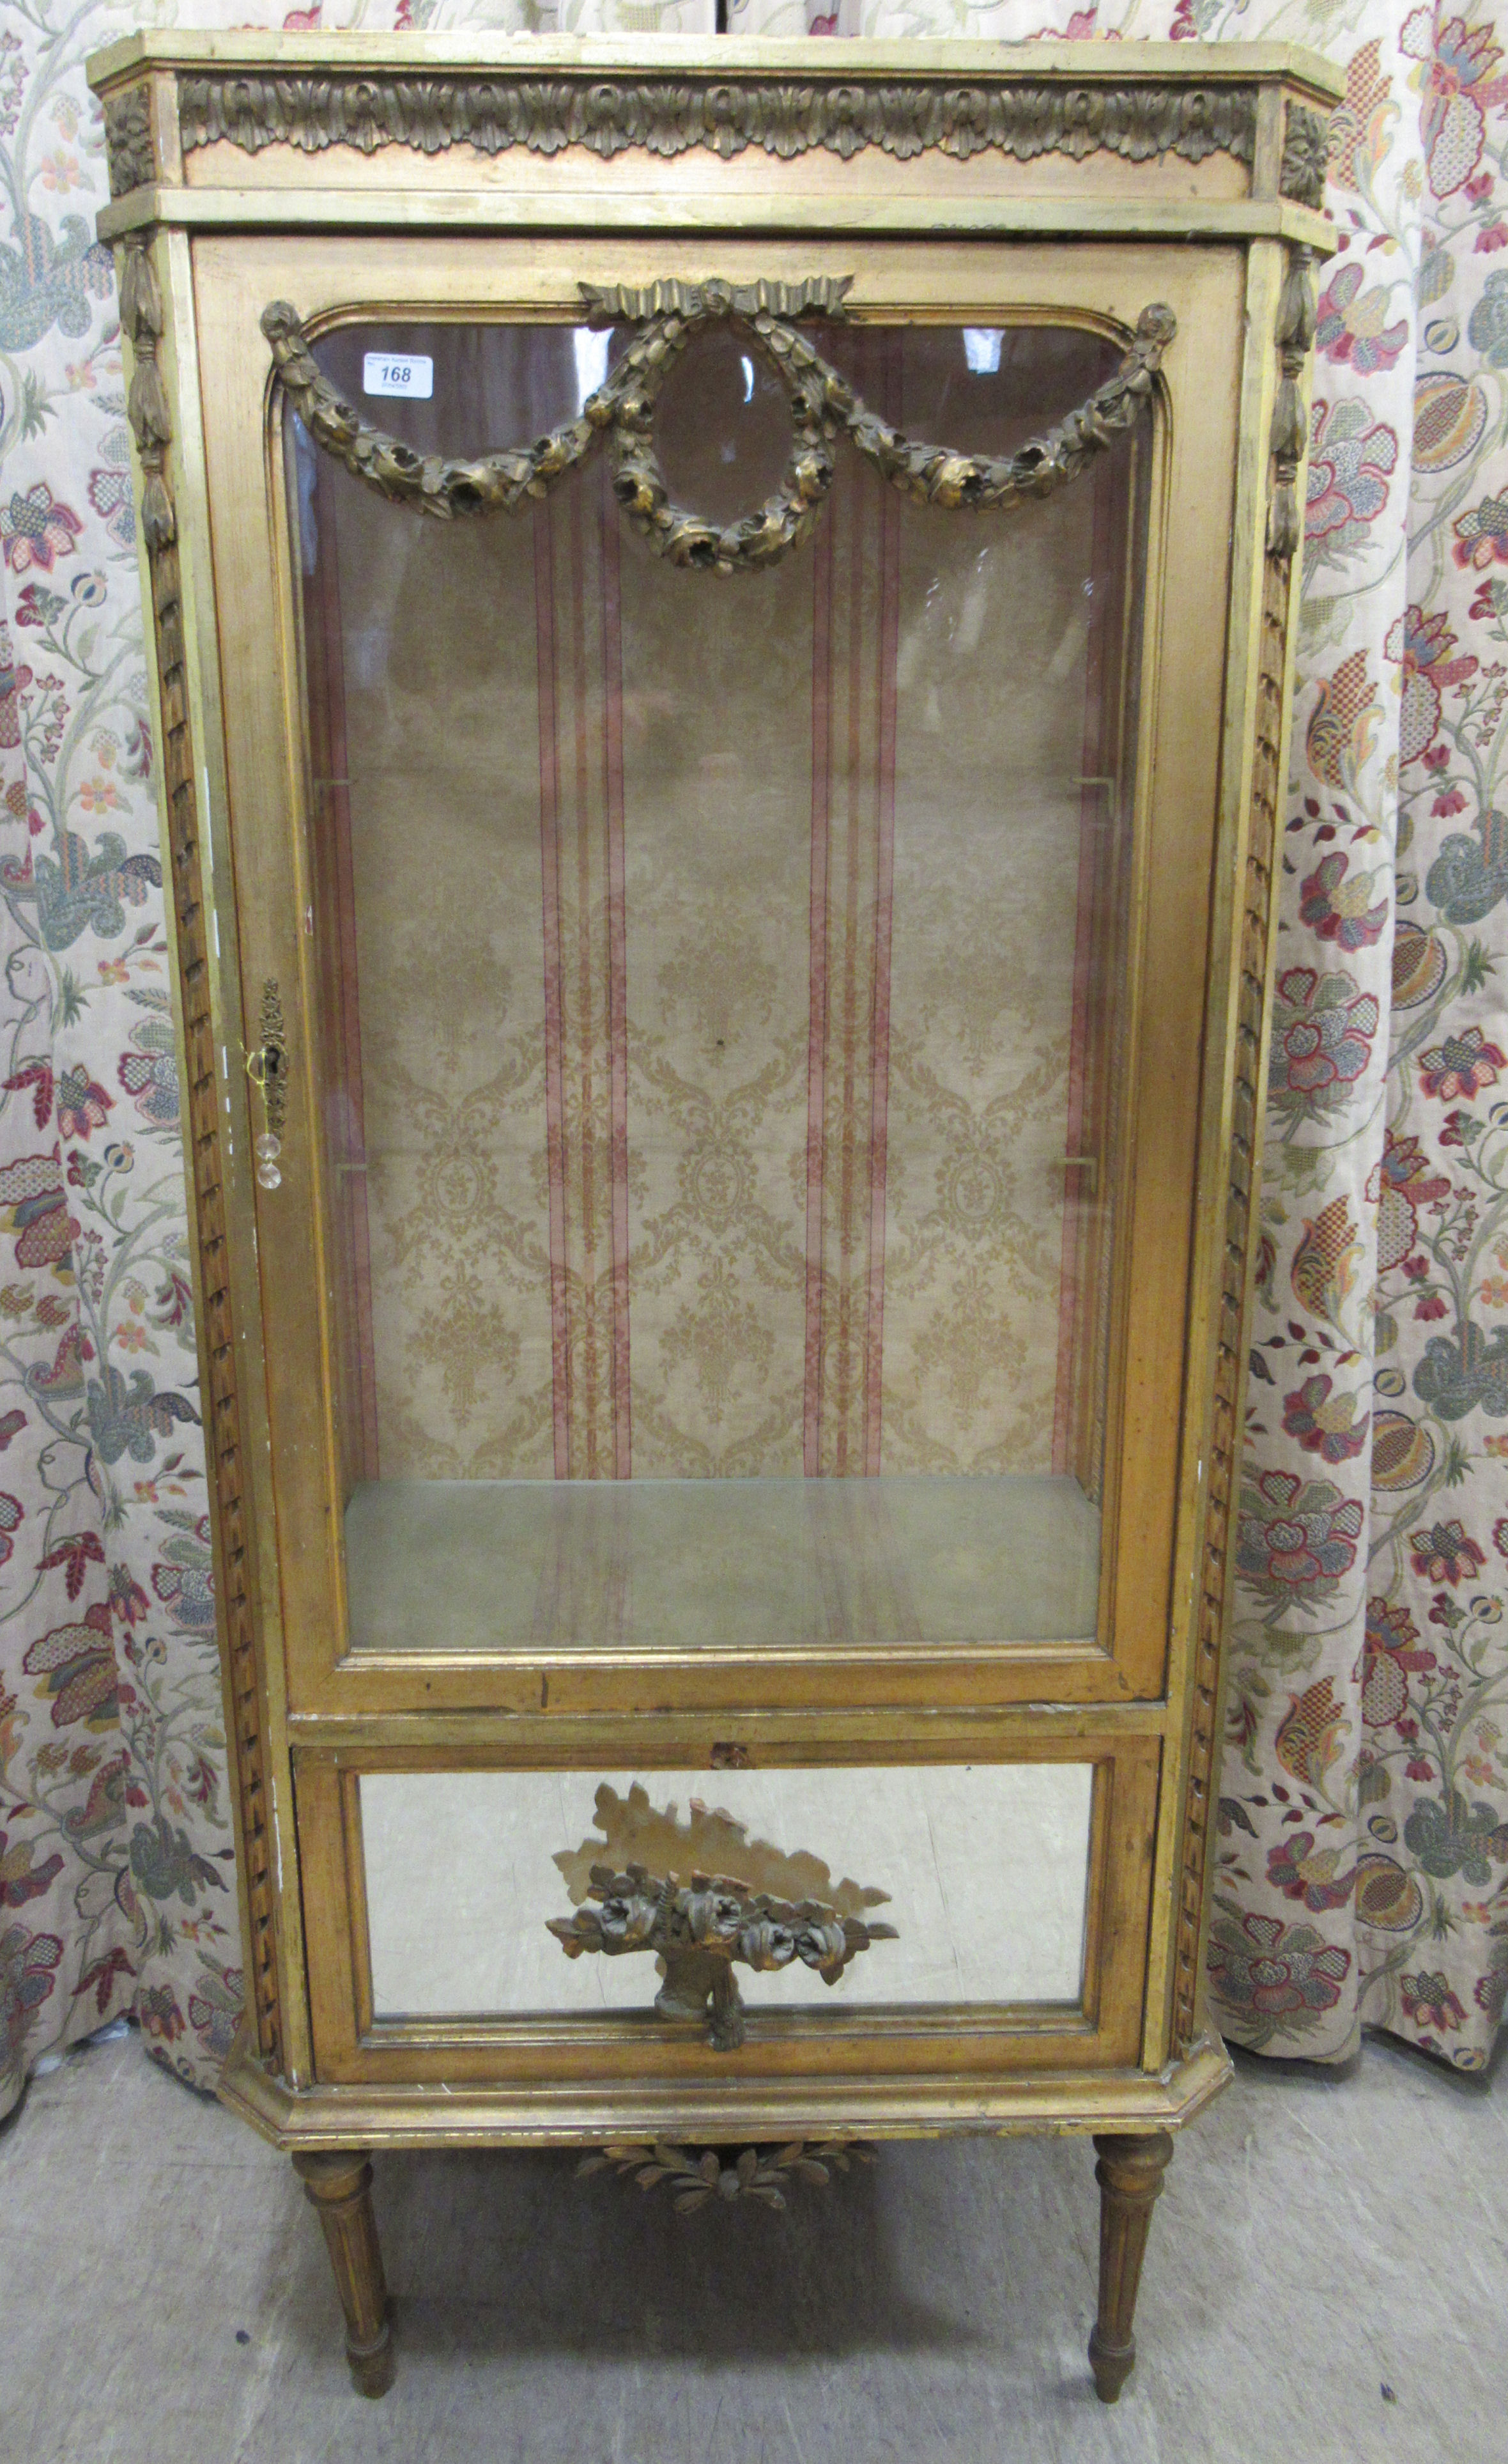 A late 19thC fully glazed giltwood and glass display cabinet with a single glazed door, surmounted